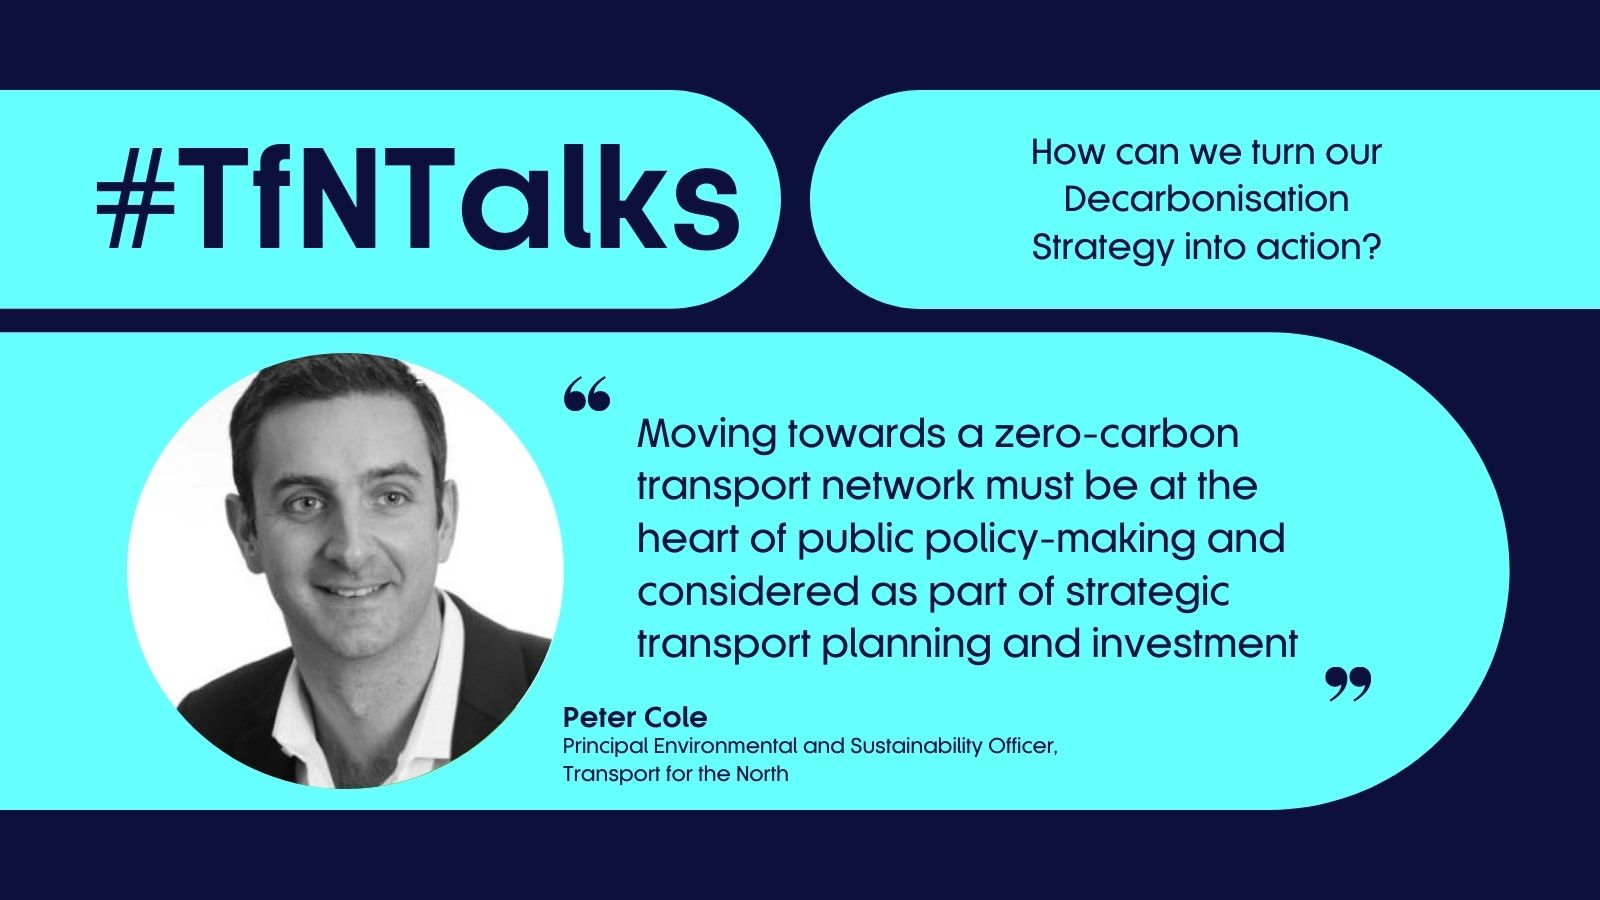 Peter Cole, TfN’s Principal Environmental and Sustainability Officer ahead of #TfNTalks